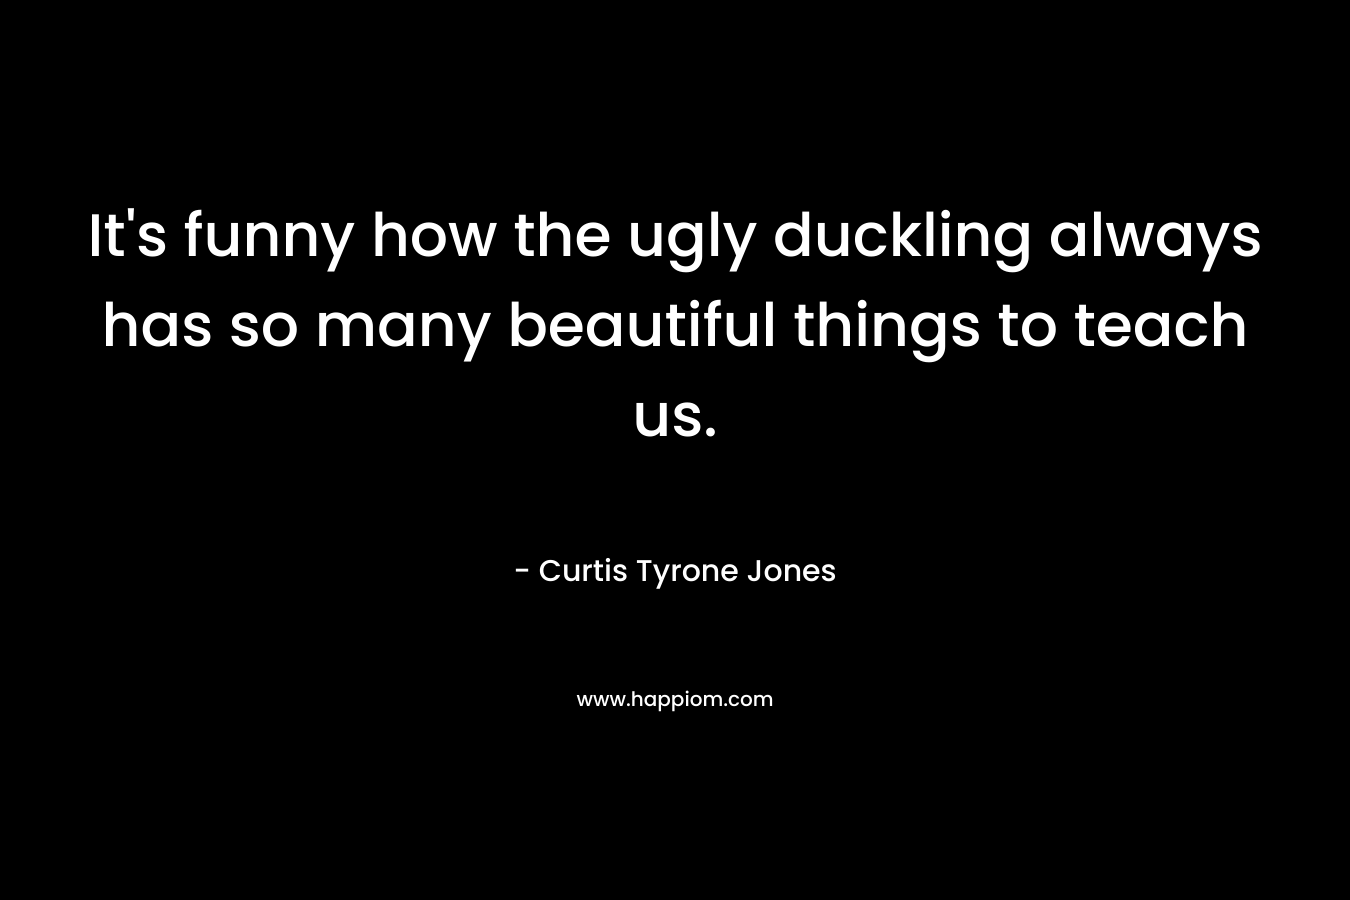 It's funny how the ugly duckling always has so many beautiful things to teach us.